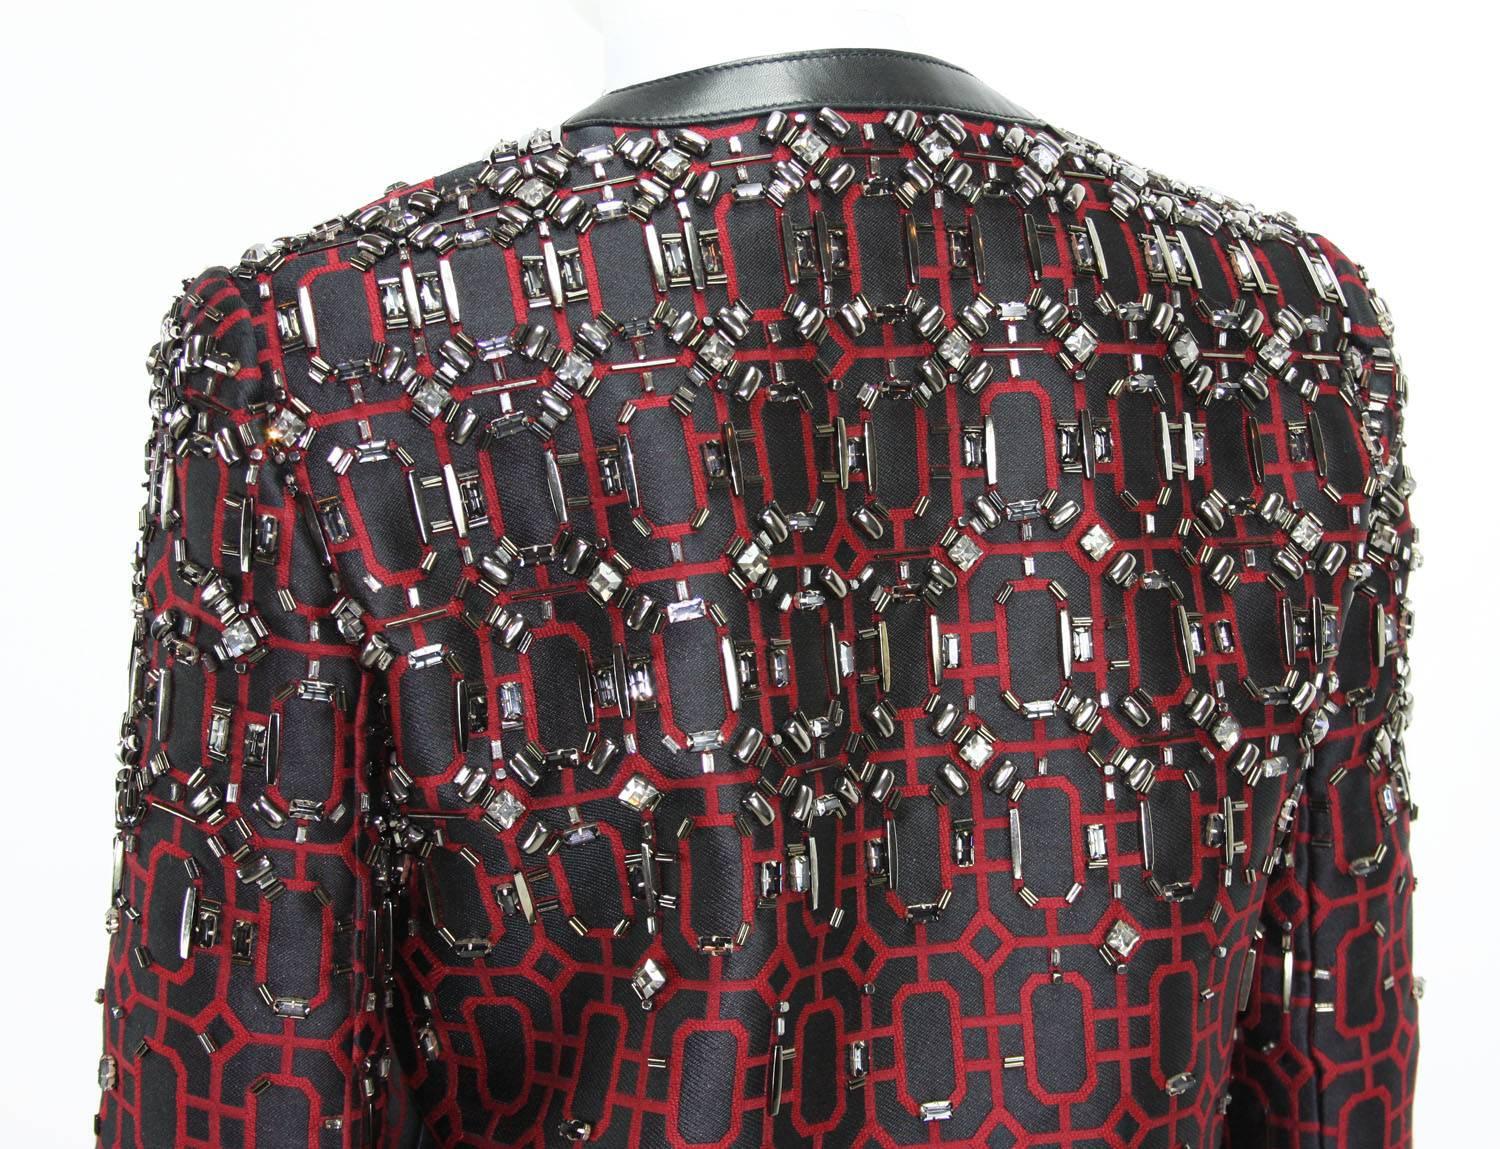 New Gucci Beaded Embellished Black Burgundy Pant Suit It. 40 - US 4/6 For Sale 1